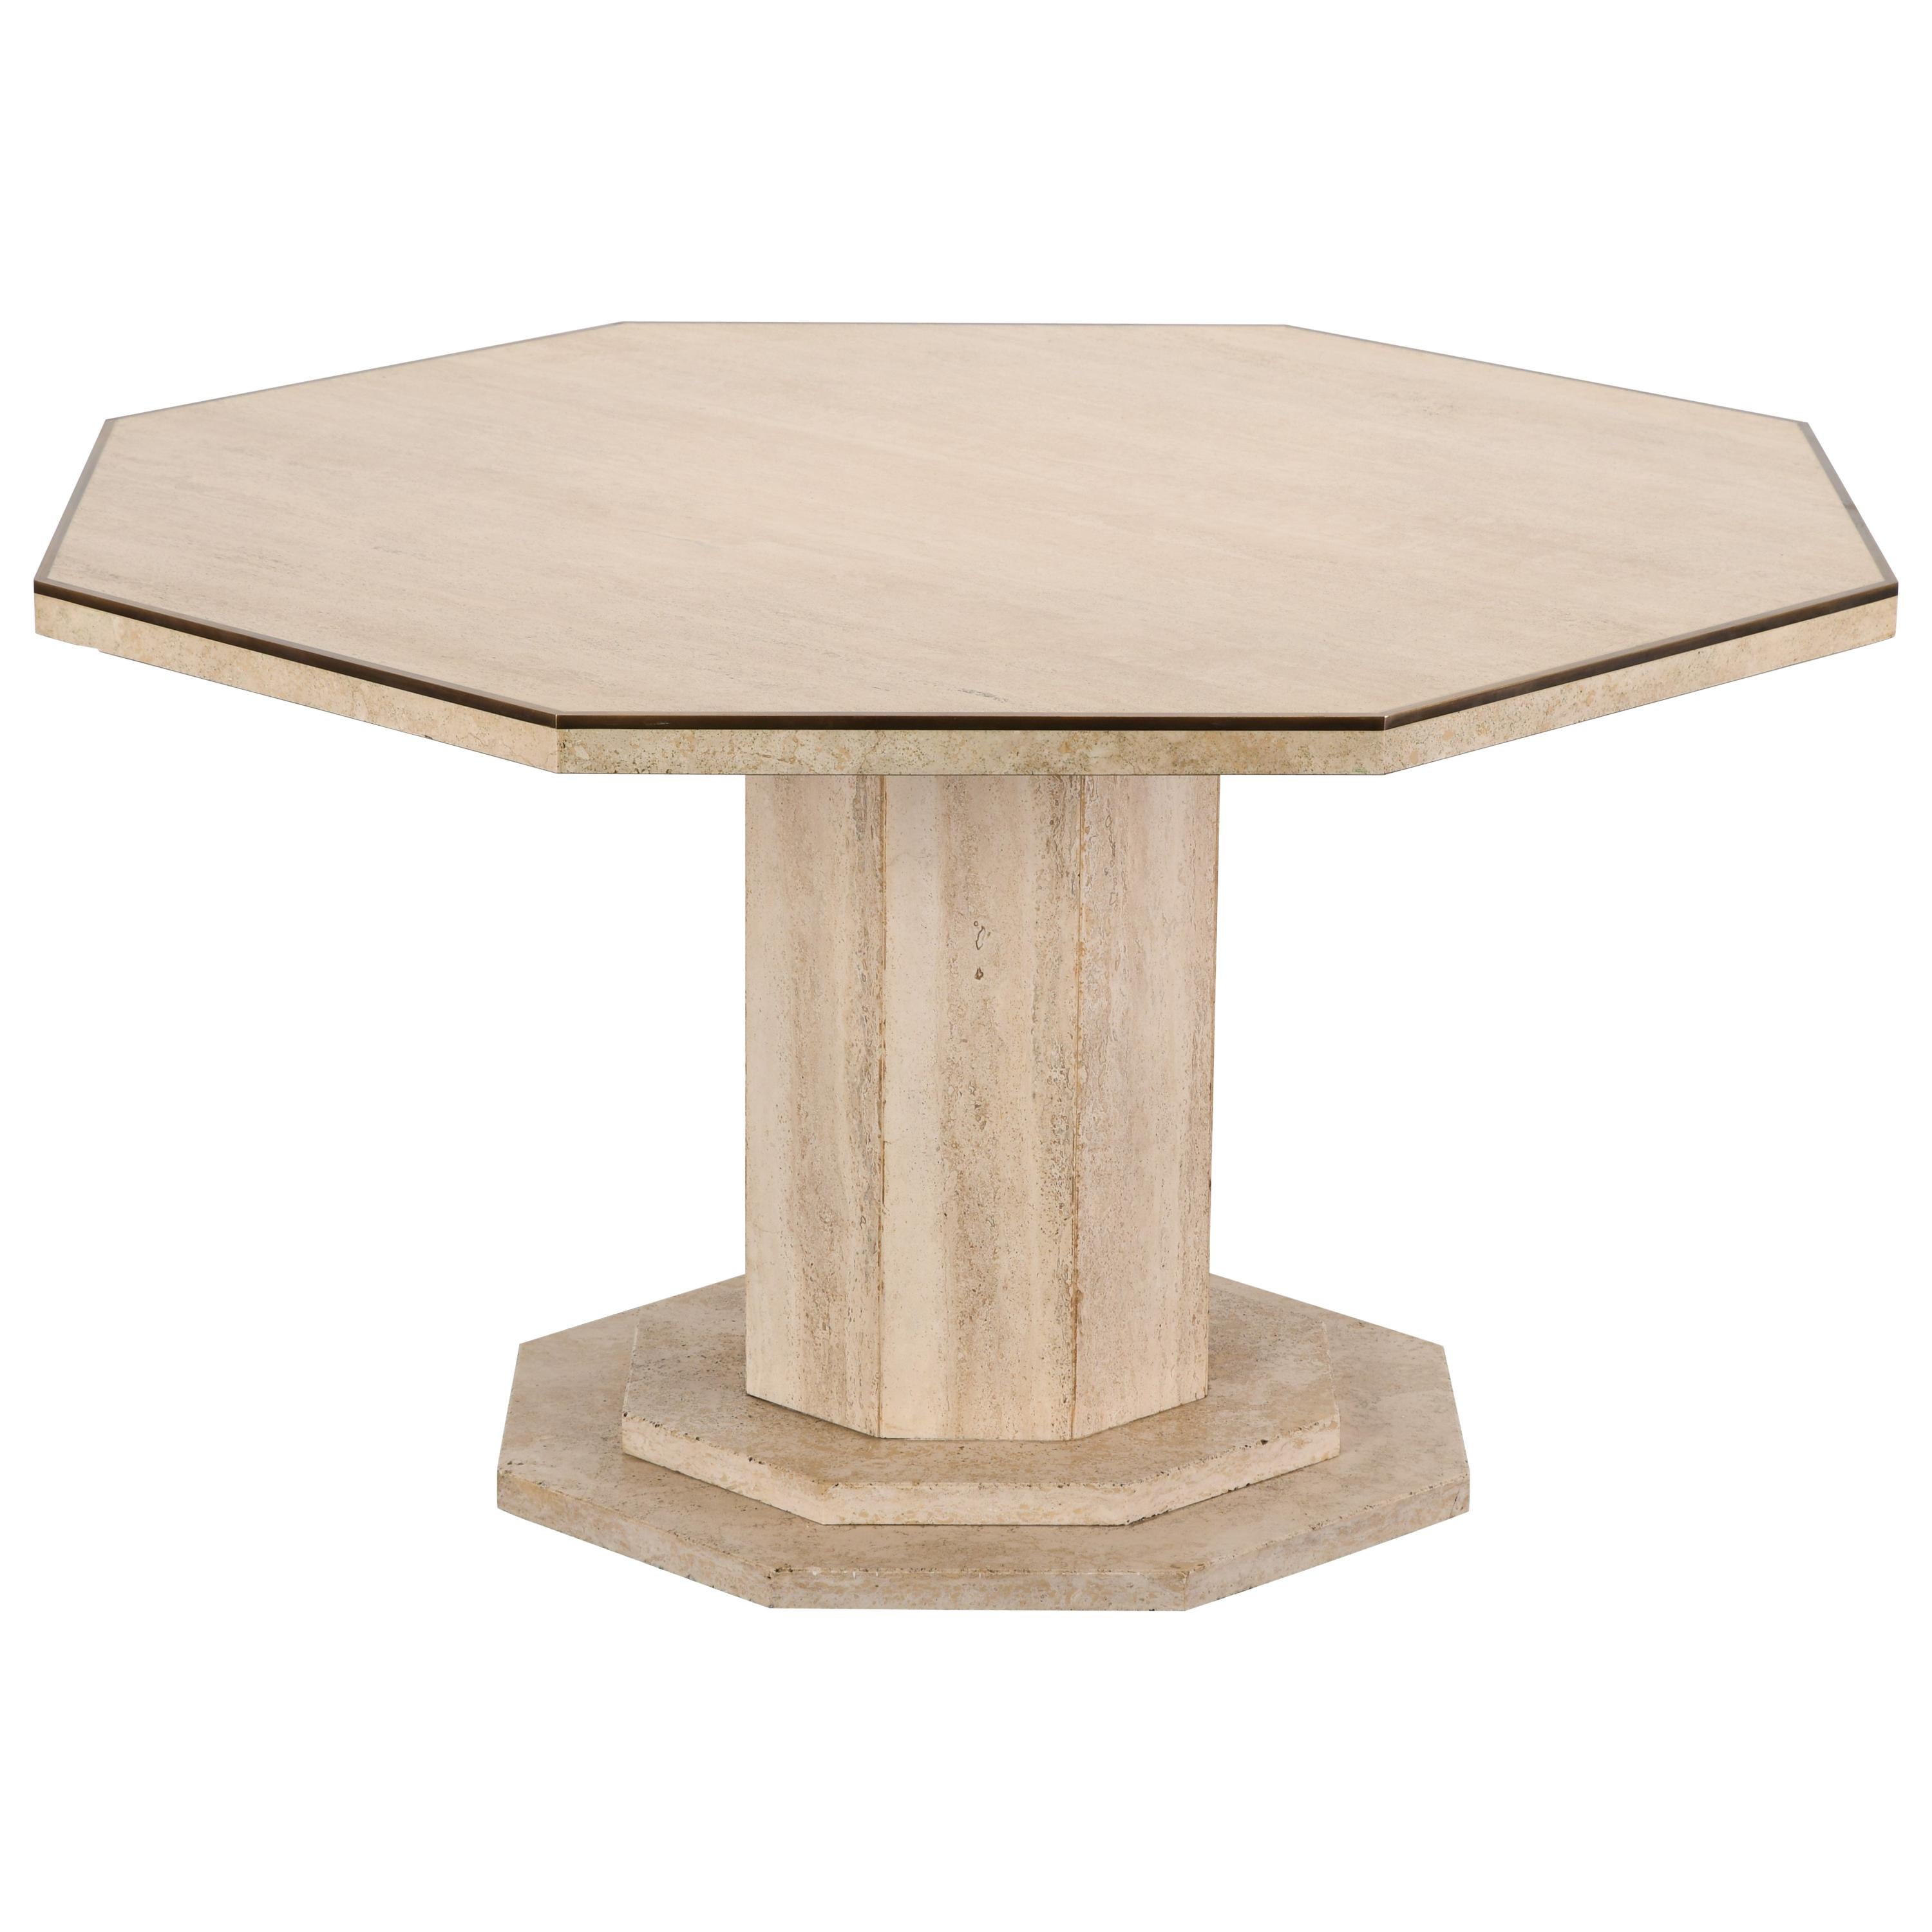 Travertine Octagonal Dining Table with Brass Roche Bobois Style, 1970s